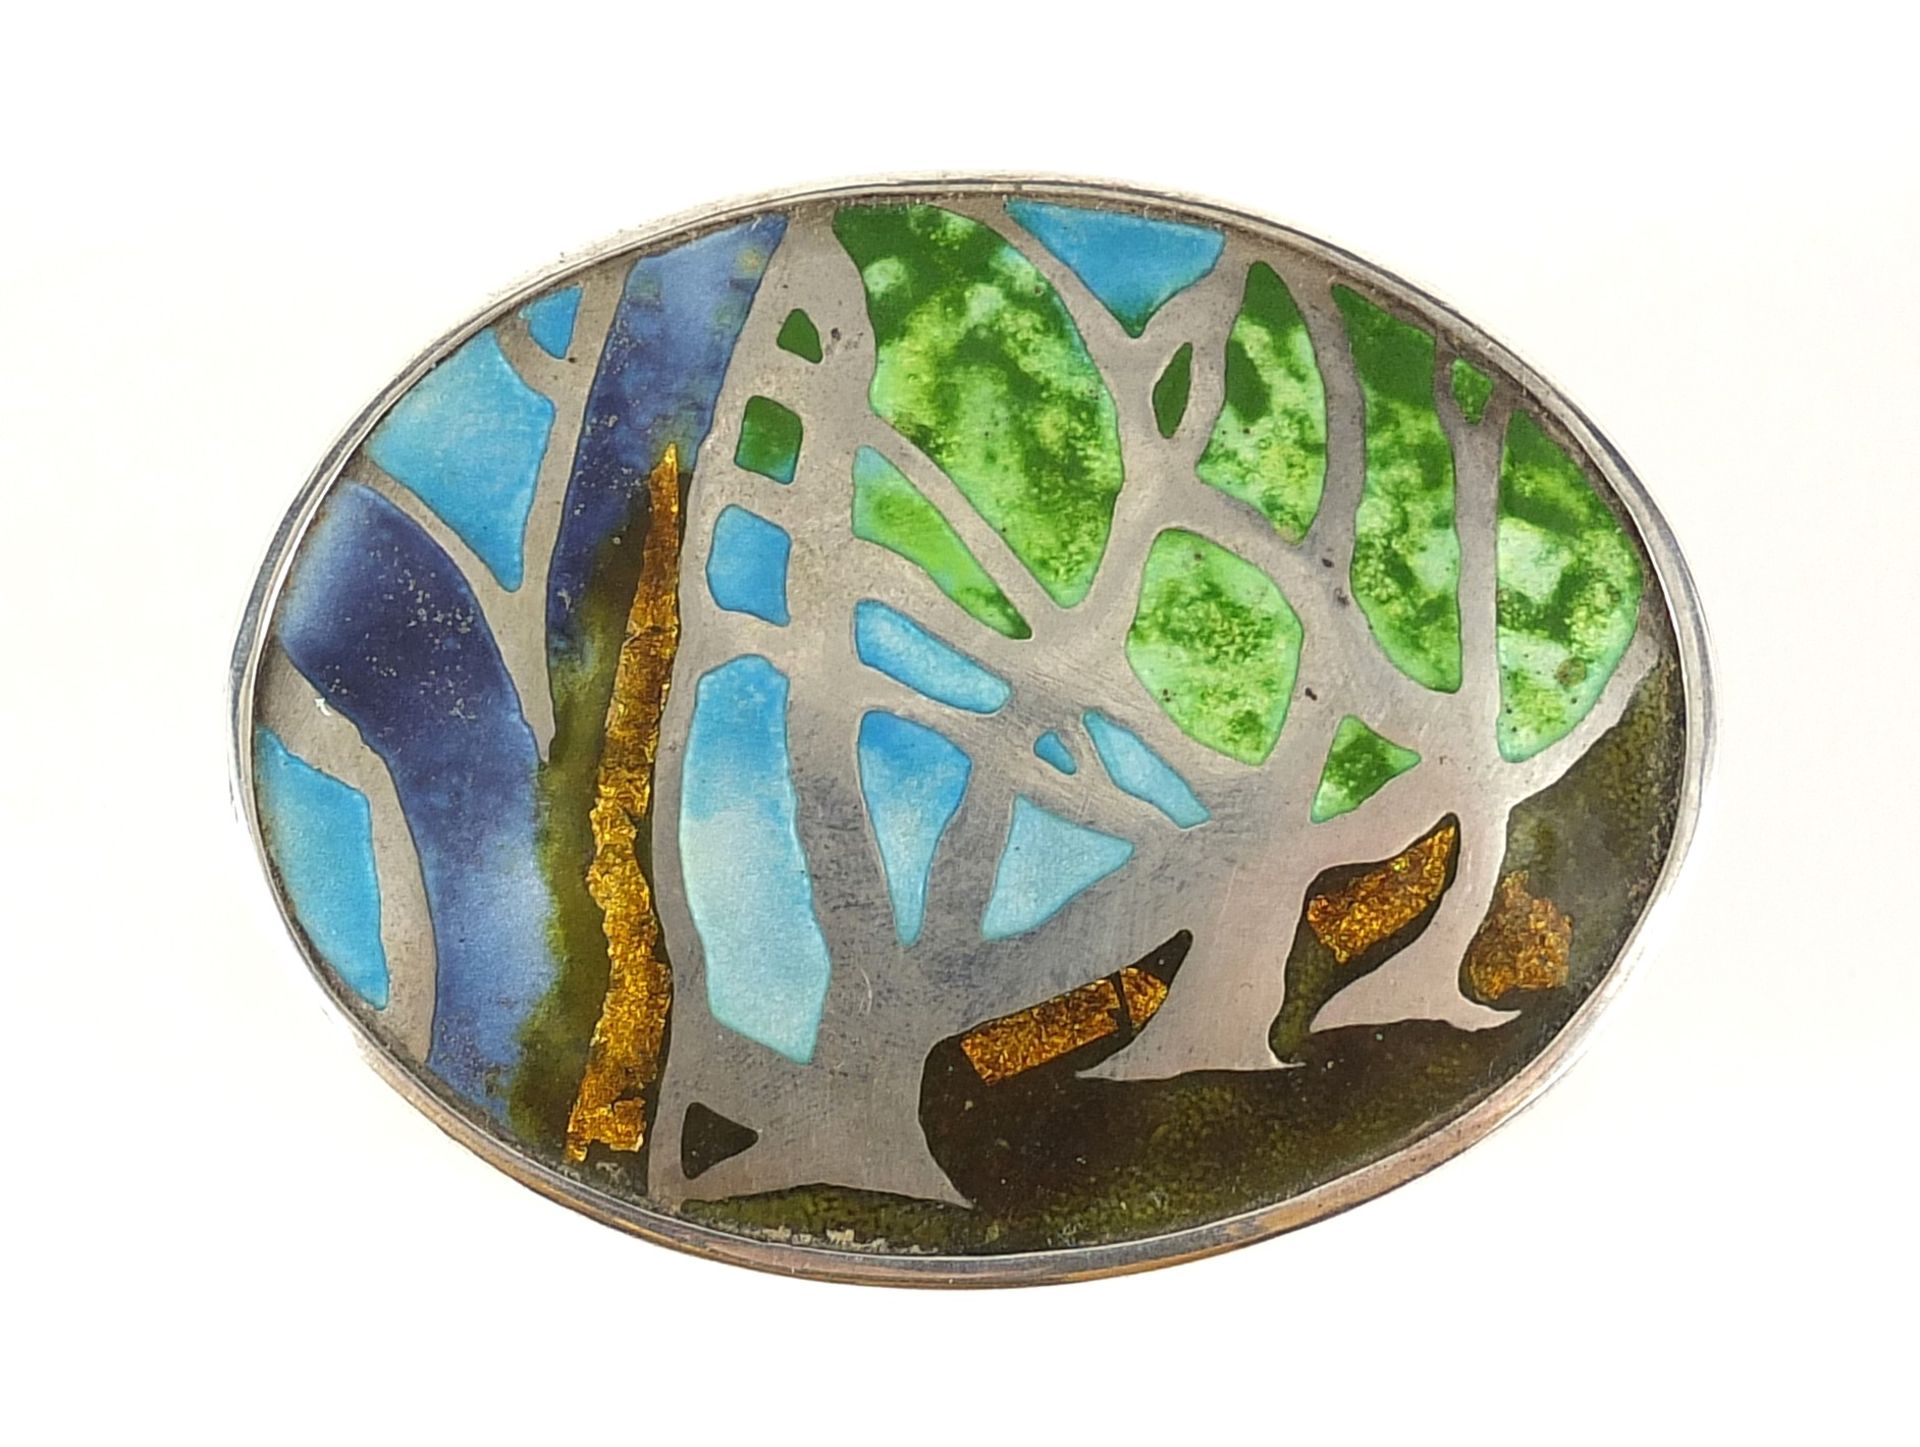 Oval silver box and cover enamelled with stylised trees, JASSO makers mark, London 2000, 5cm high - Image 2 of 5